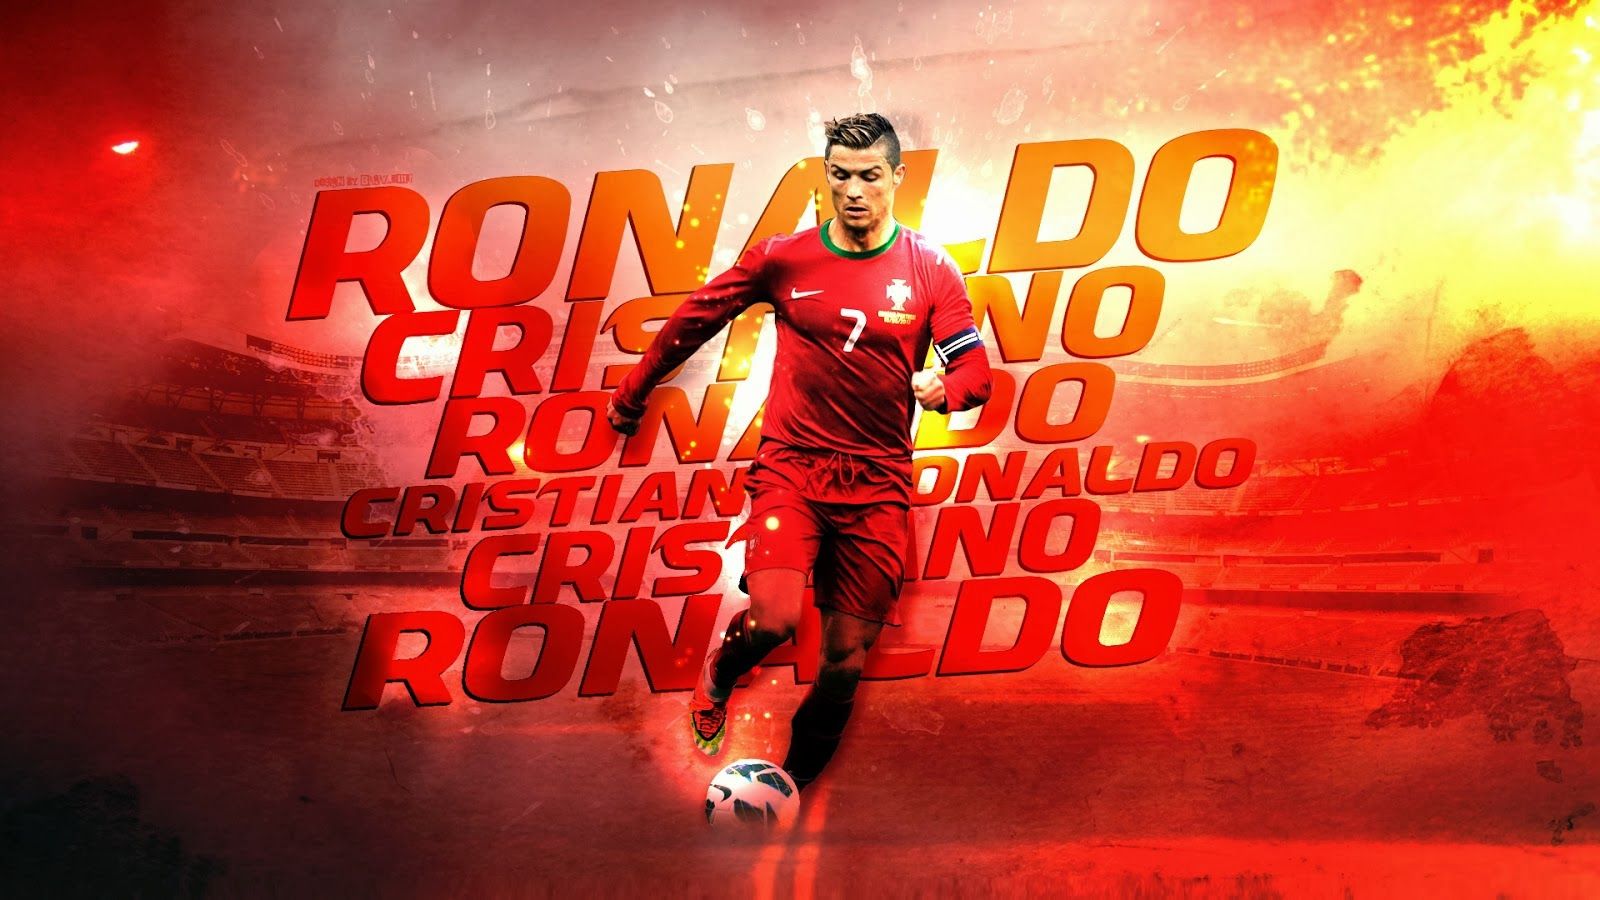 Download wallpapers Cristiano Ronaldo, CR7, Portugal national football  team, traditional goal celebration, red stone background, football, CR7  Portugal, grand art for desktop free. Pictures for desktop free